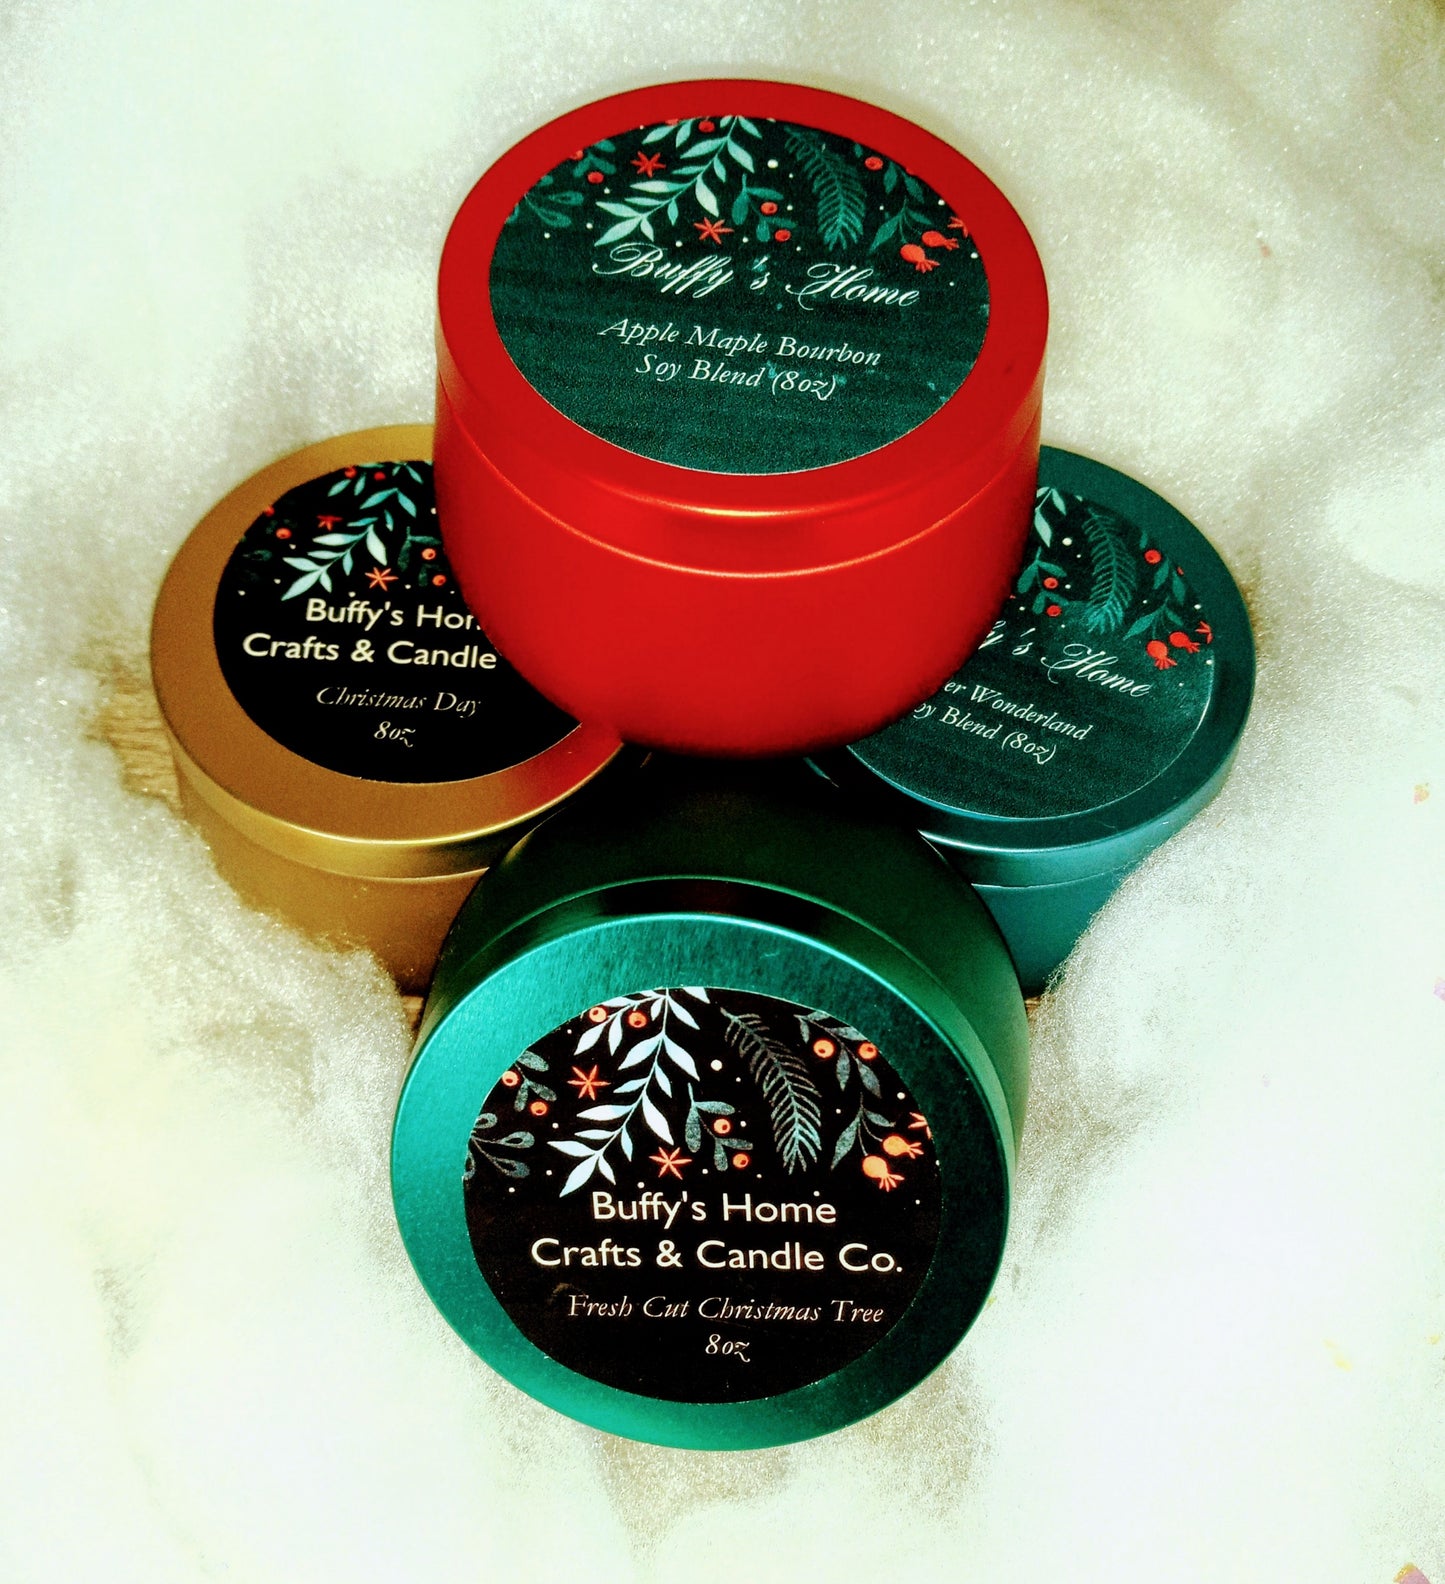 Get 3 Holiday Fragrance Candles for $25.00 (8oz multi-colored tins)